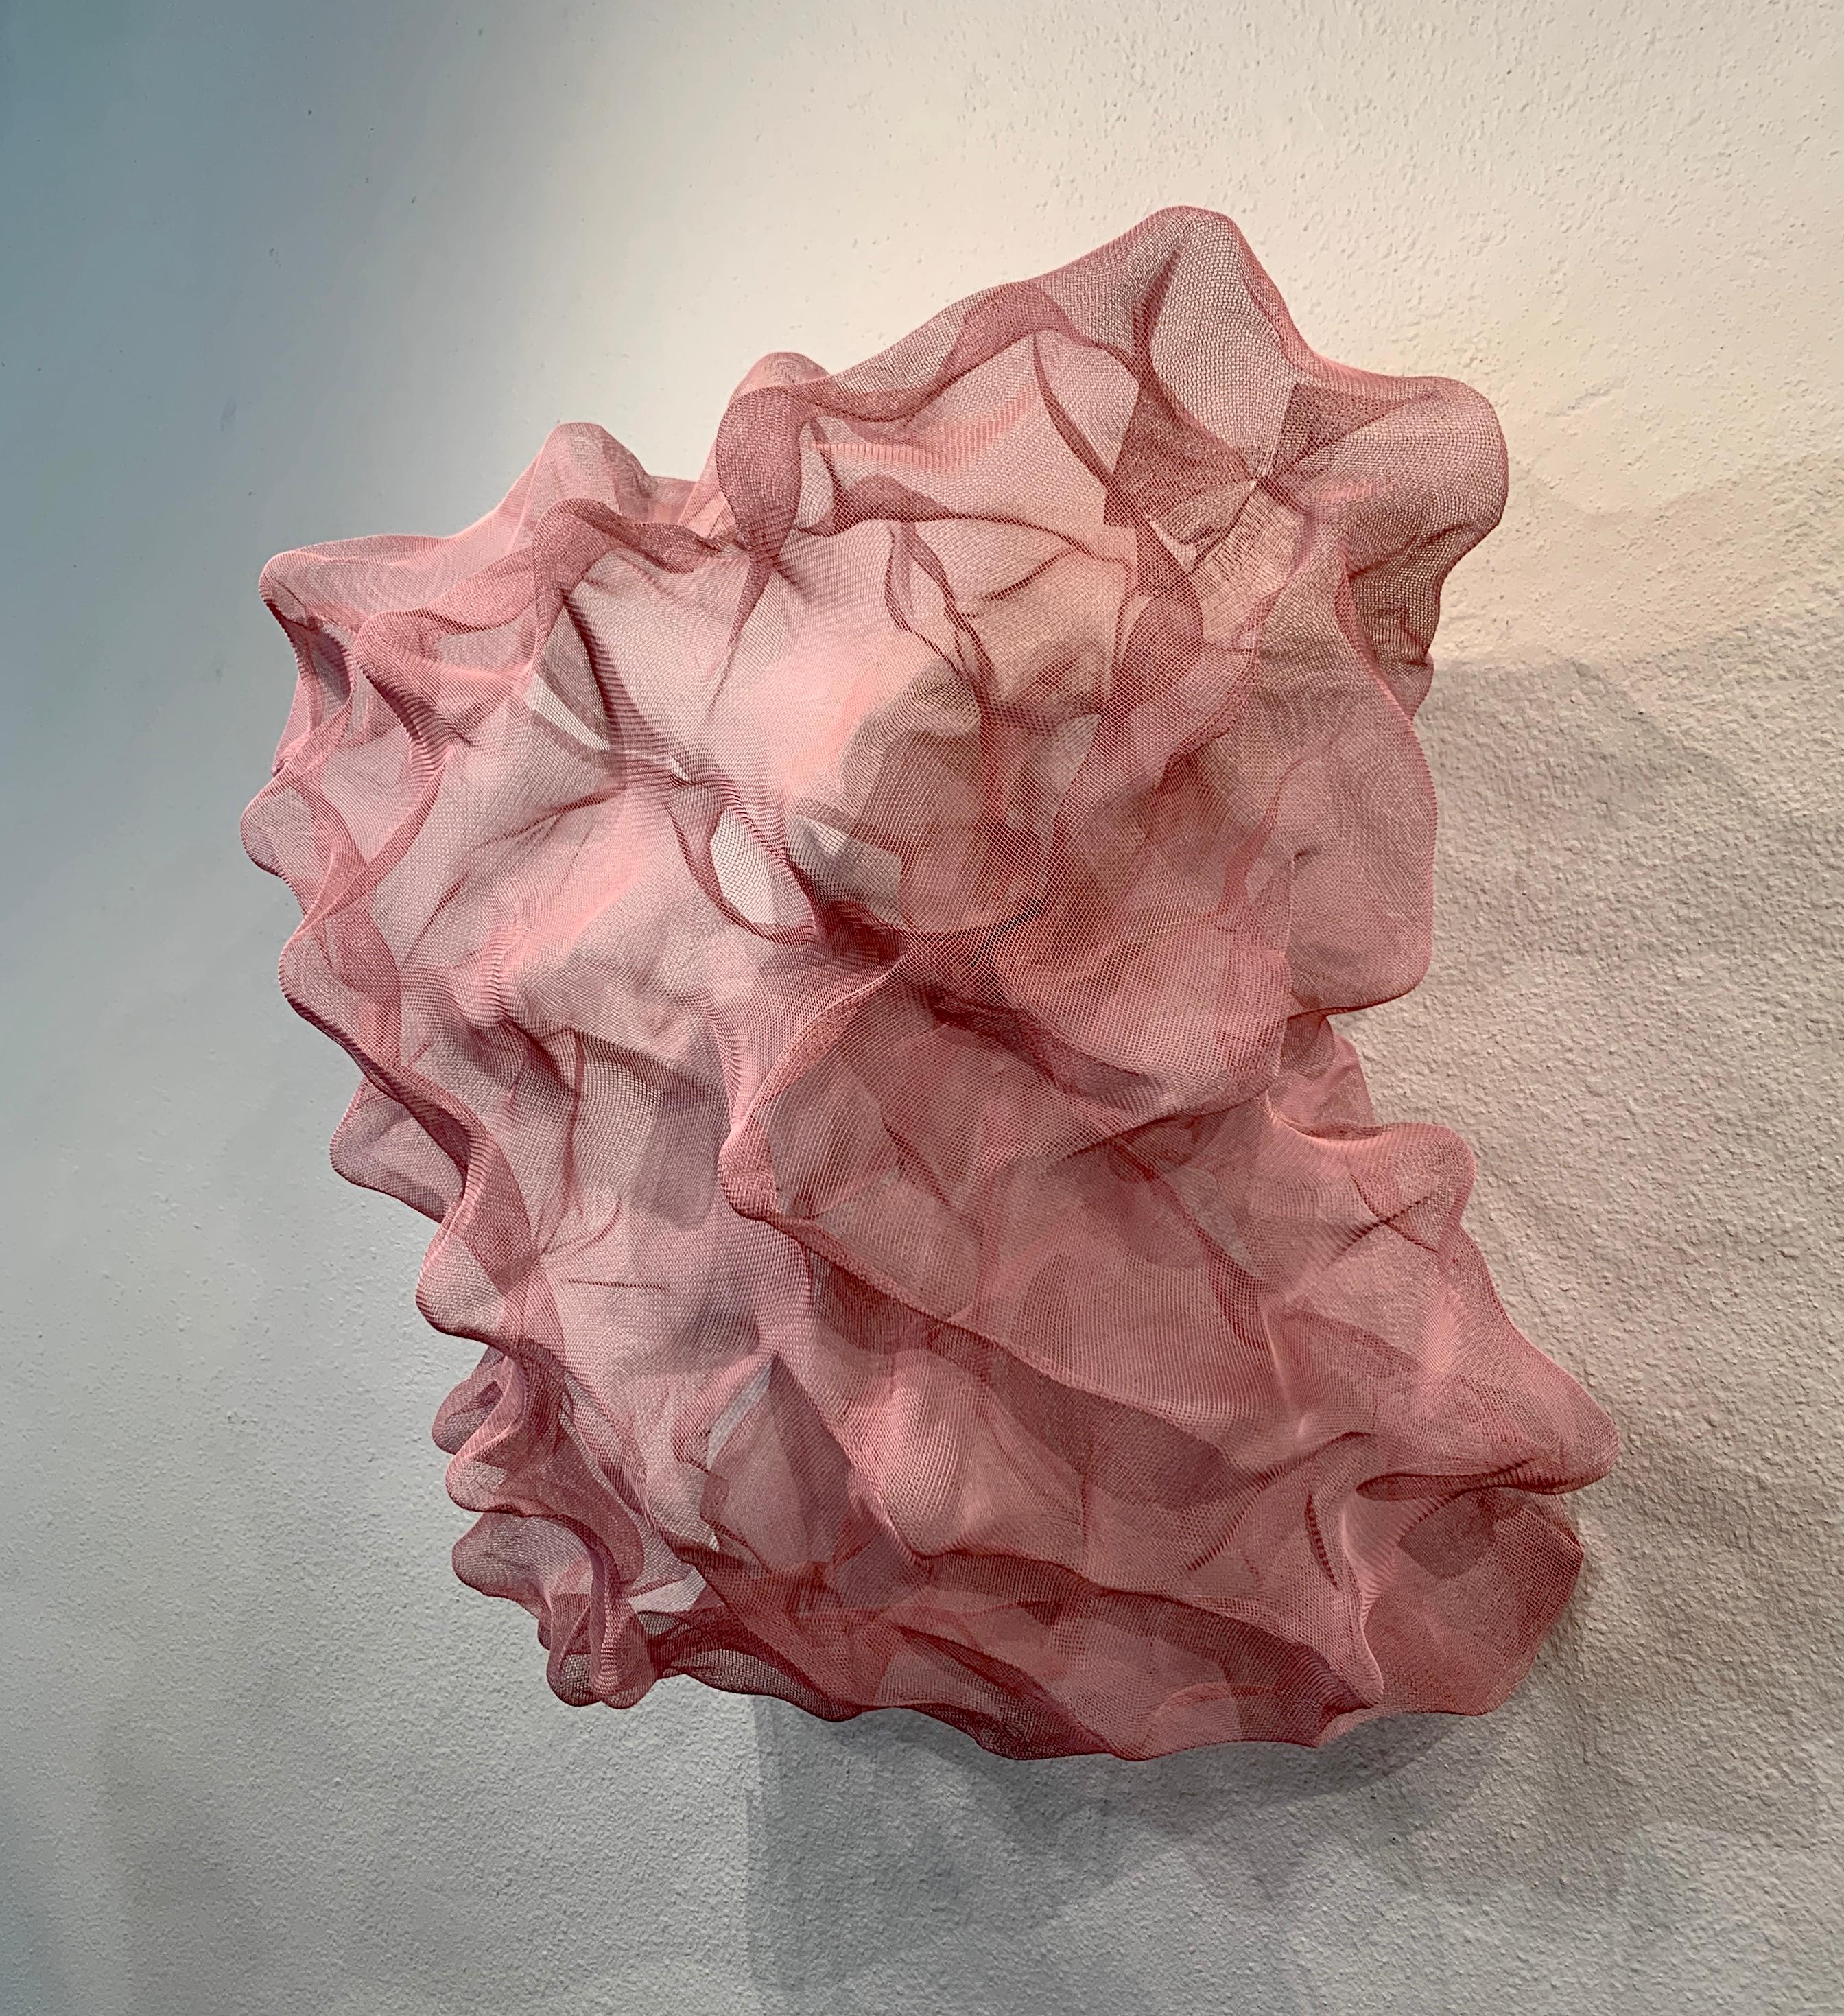 Cotton Candy Cloud, Atticus Adams Pink Metal Mesh Sculpture Screen

This piece can be hung from the ceiling, hung from a wall, or used on a pedestal or table.

Metal fiber sculpture that incorporates fascinating light and shadow into its